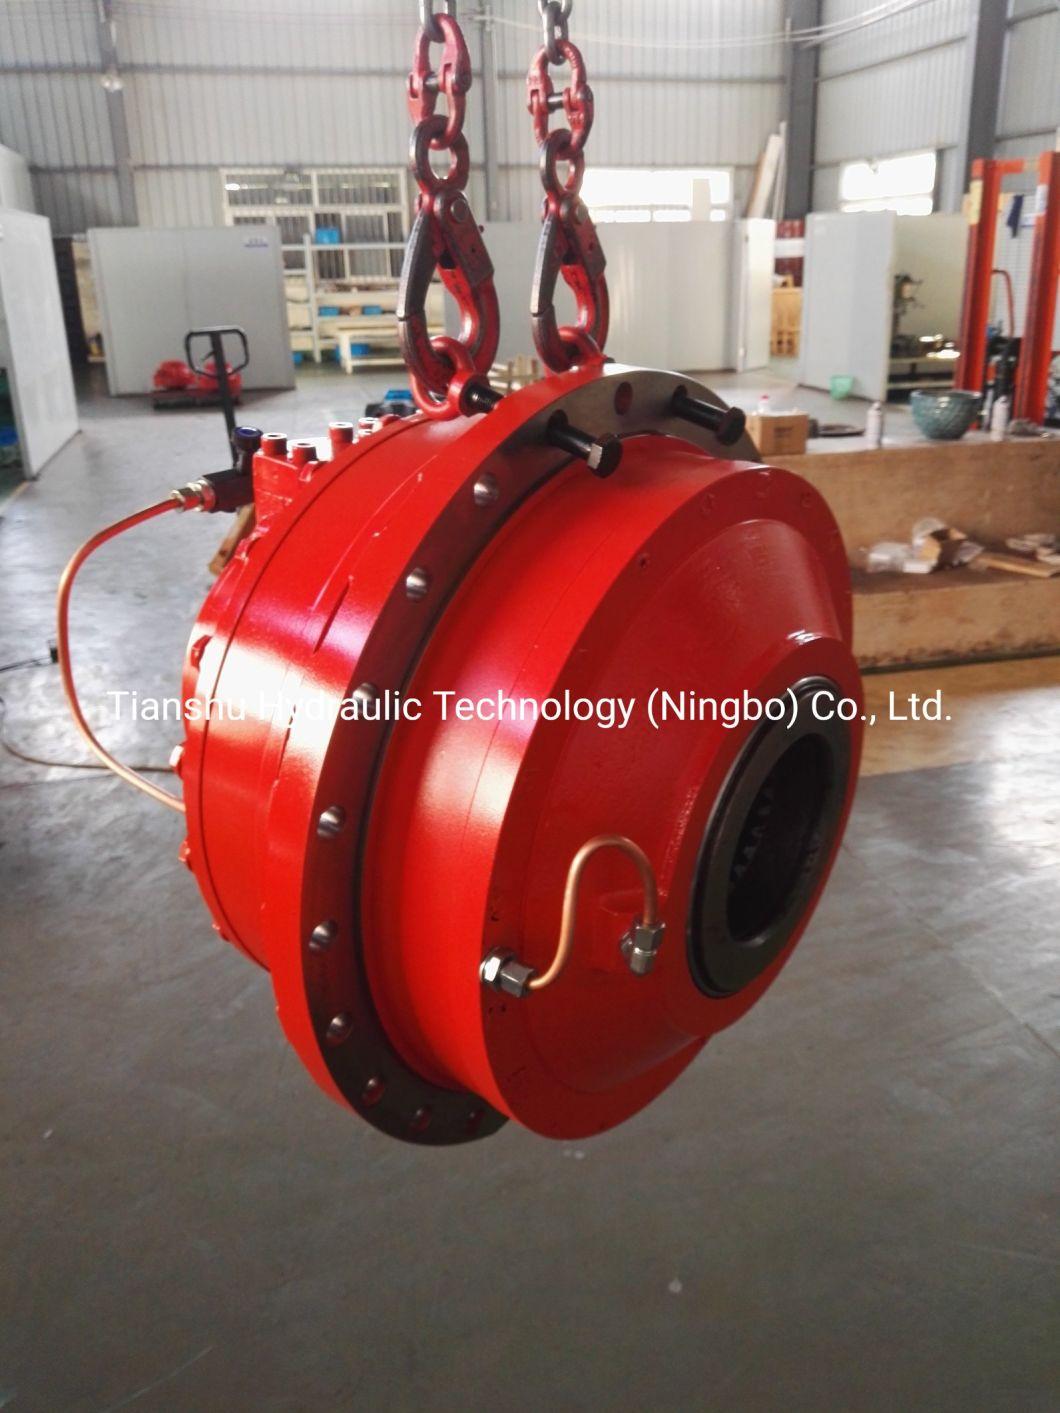 Motor Hydraulic Hagglunds Motor Drive Ca 210 210 Ca0n00 02 00 Low Speed High Torque Hydraulic Motor From Chinese Factory